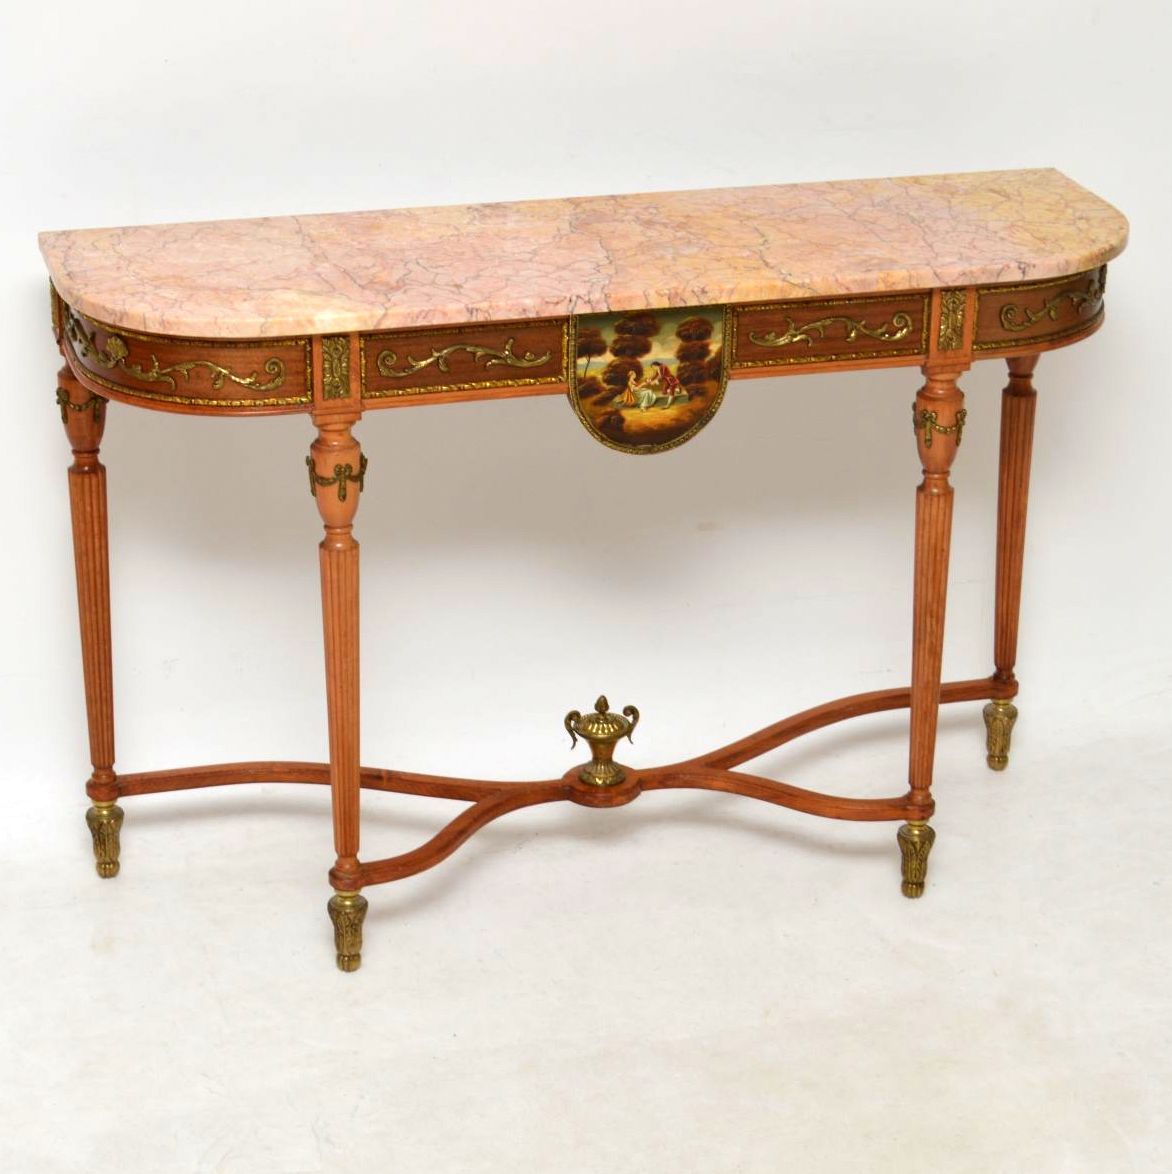 Antique French Louis Xv Style Marble Top Console Table | Interior Pertaining To Marble Top Console Tables (View 3 of 20)